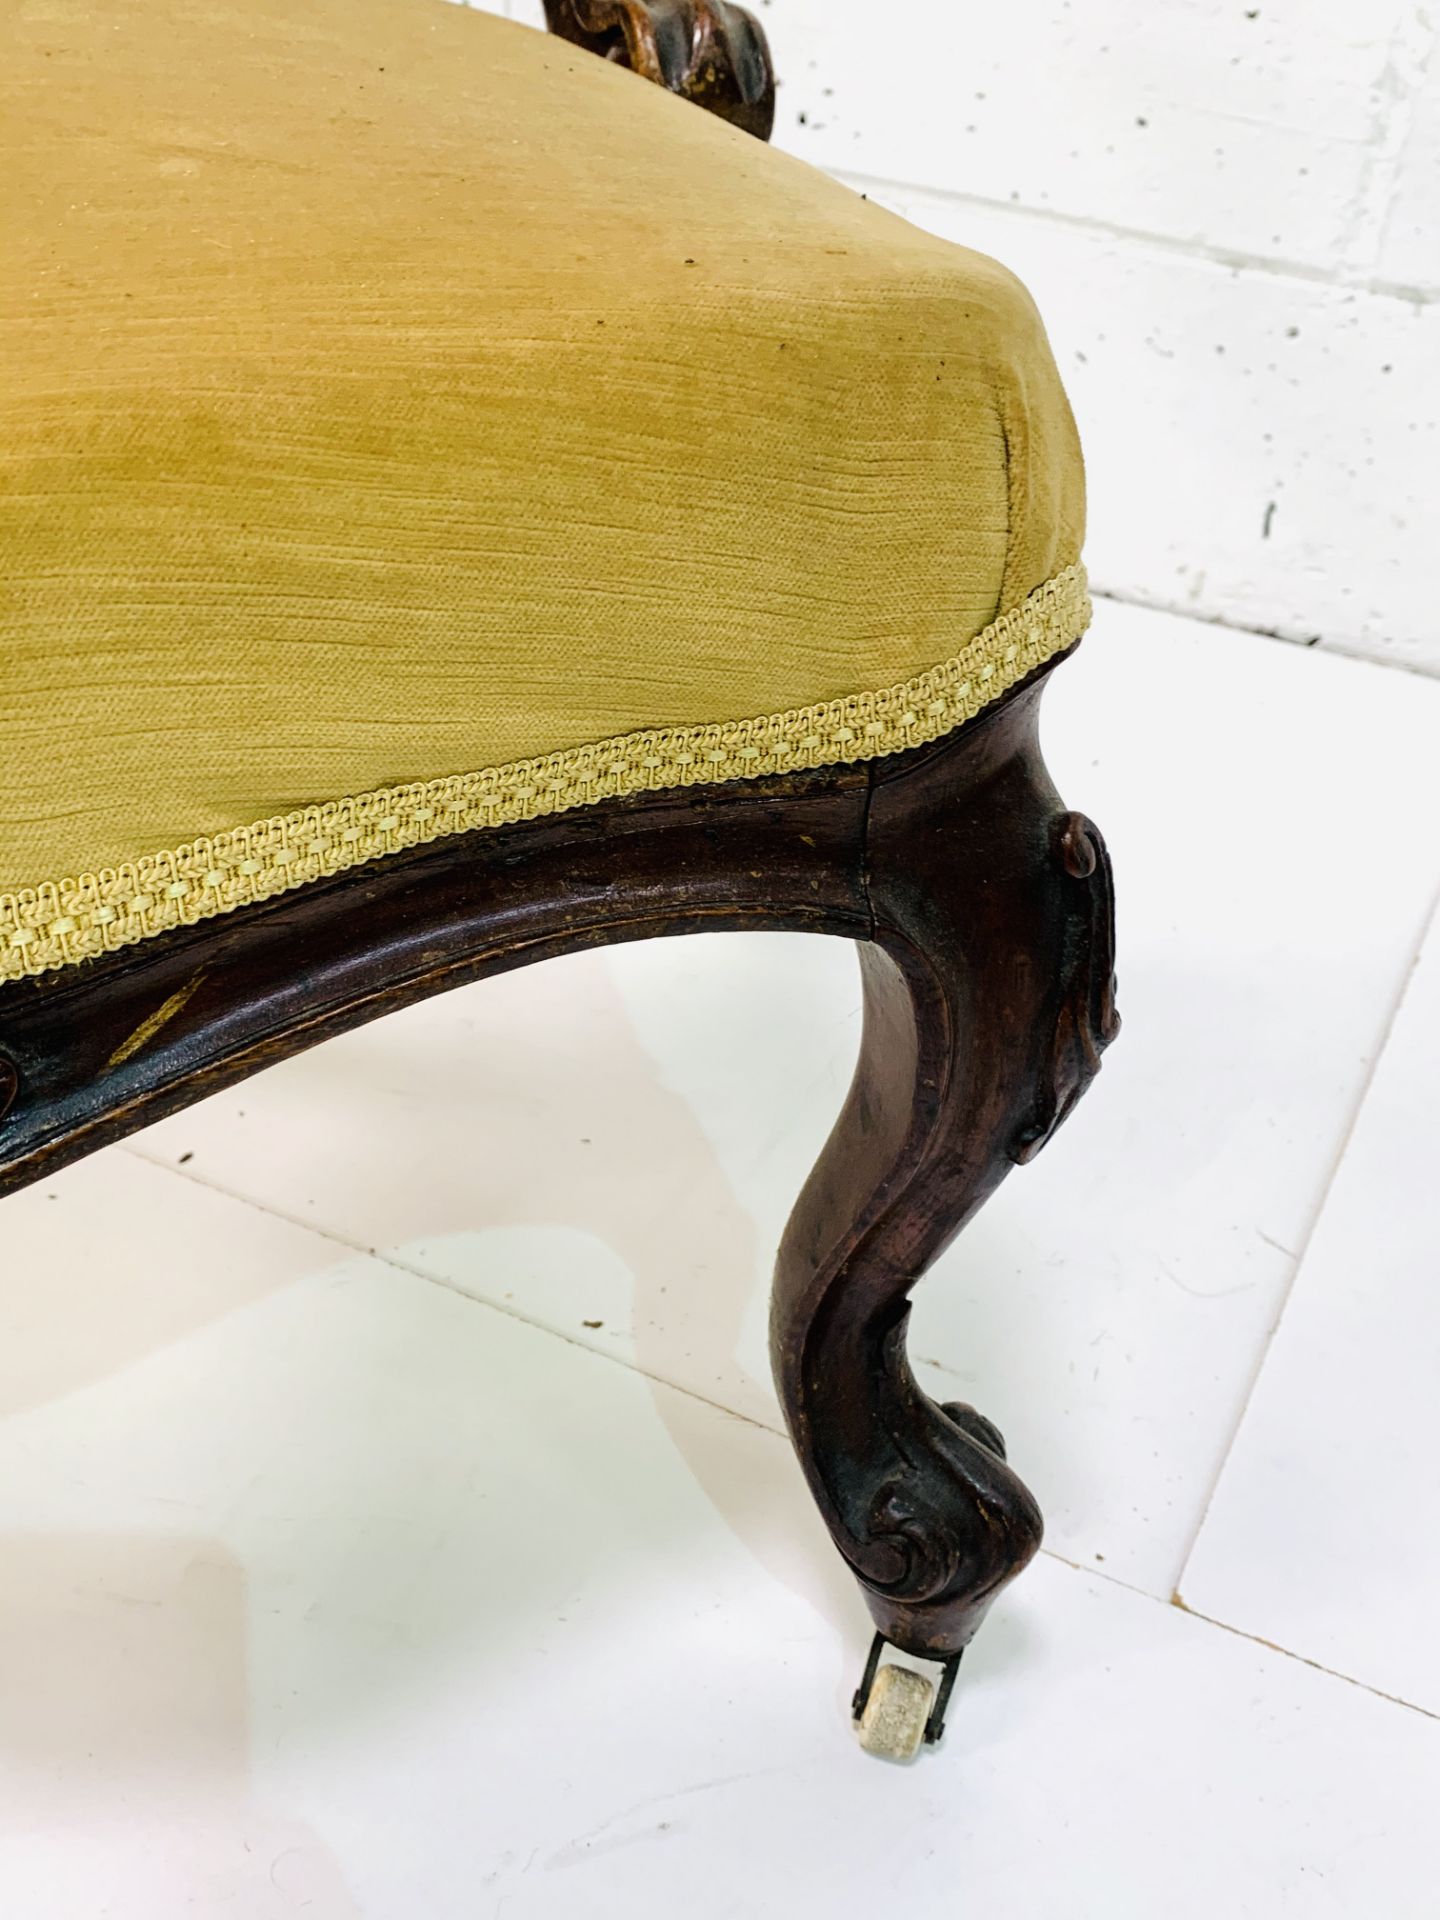 Ornately decorated mahogany framed drawing room chair with mustard yellow velvet upholstery. - Image 2 of 5